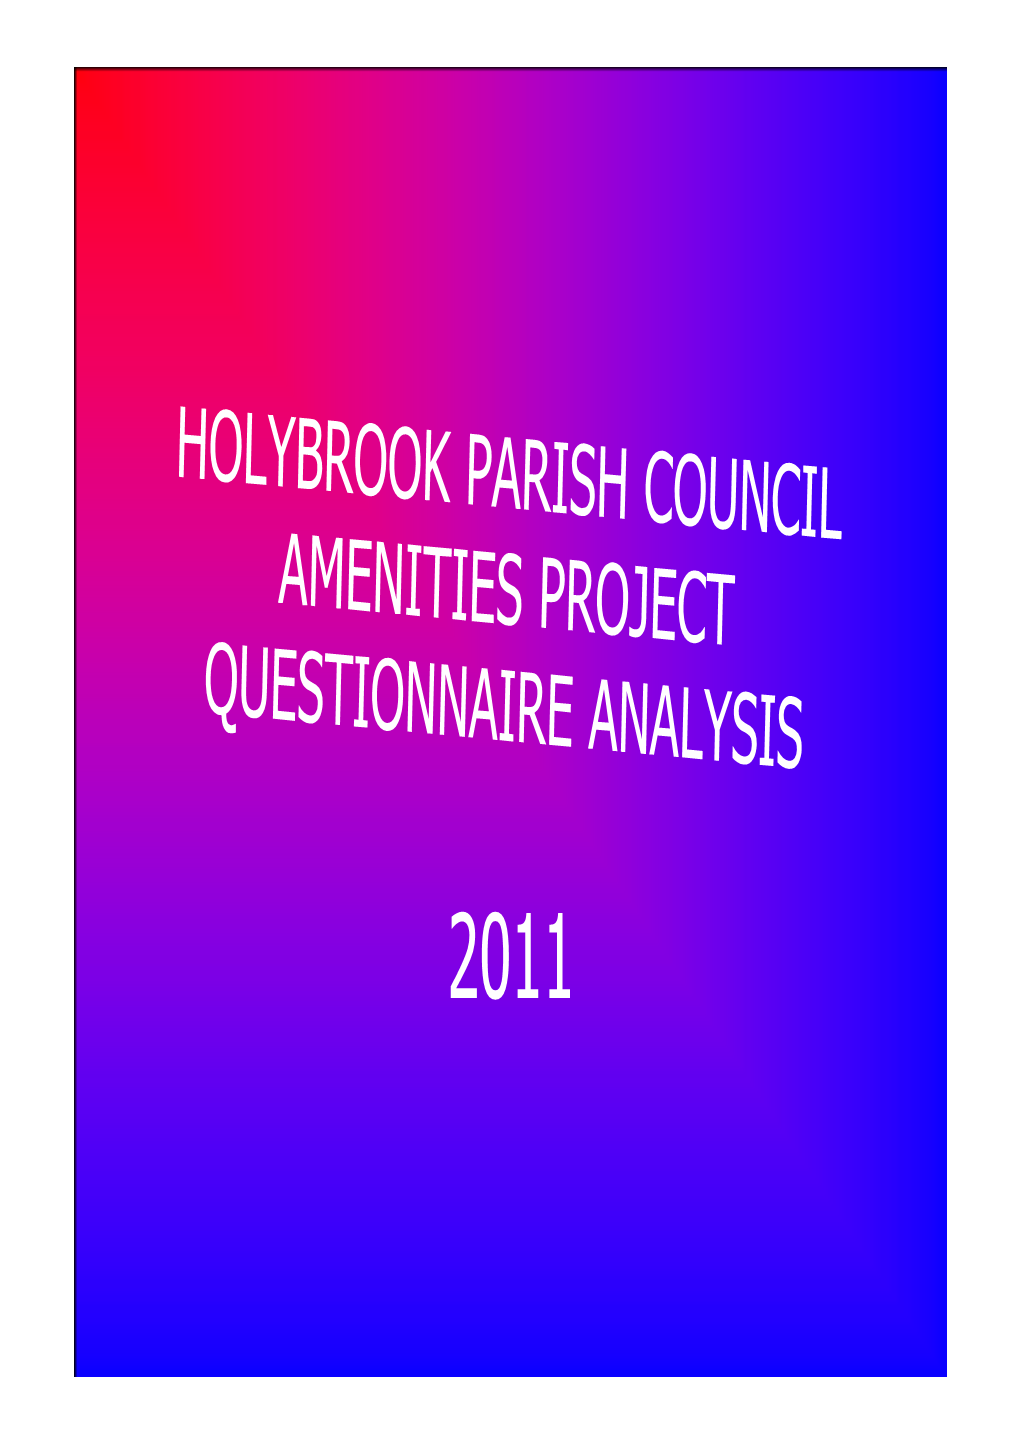 Amenities Project Questionnaire Analysis